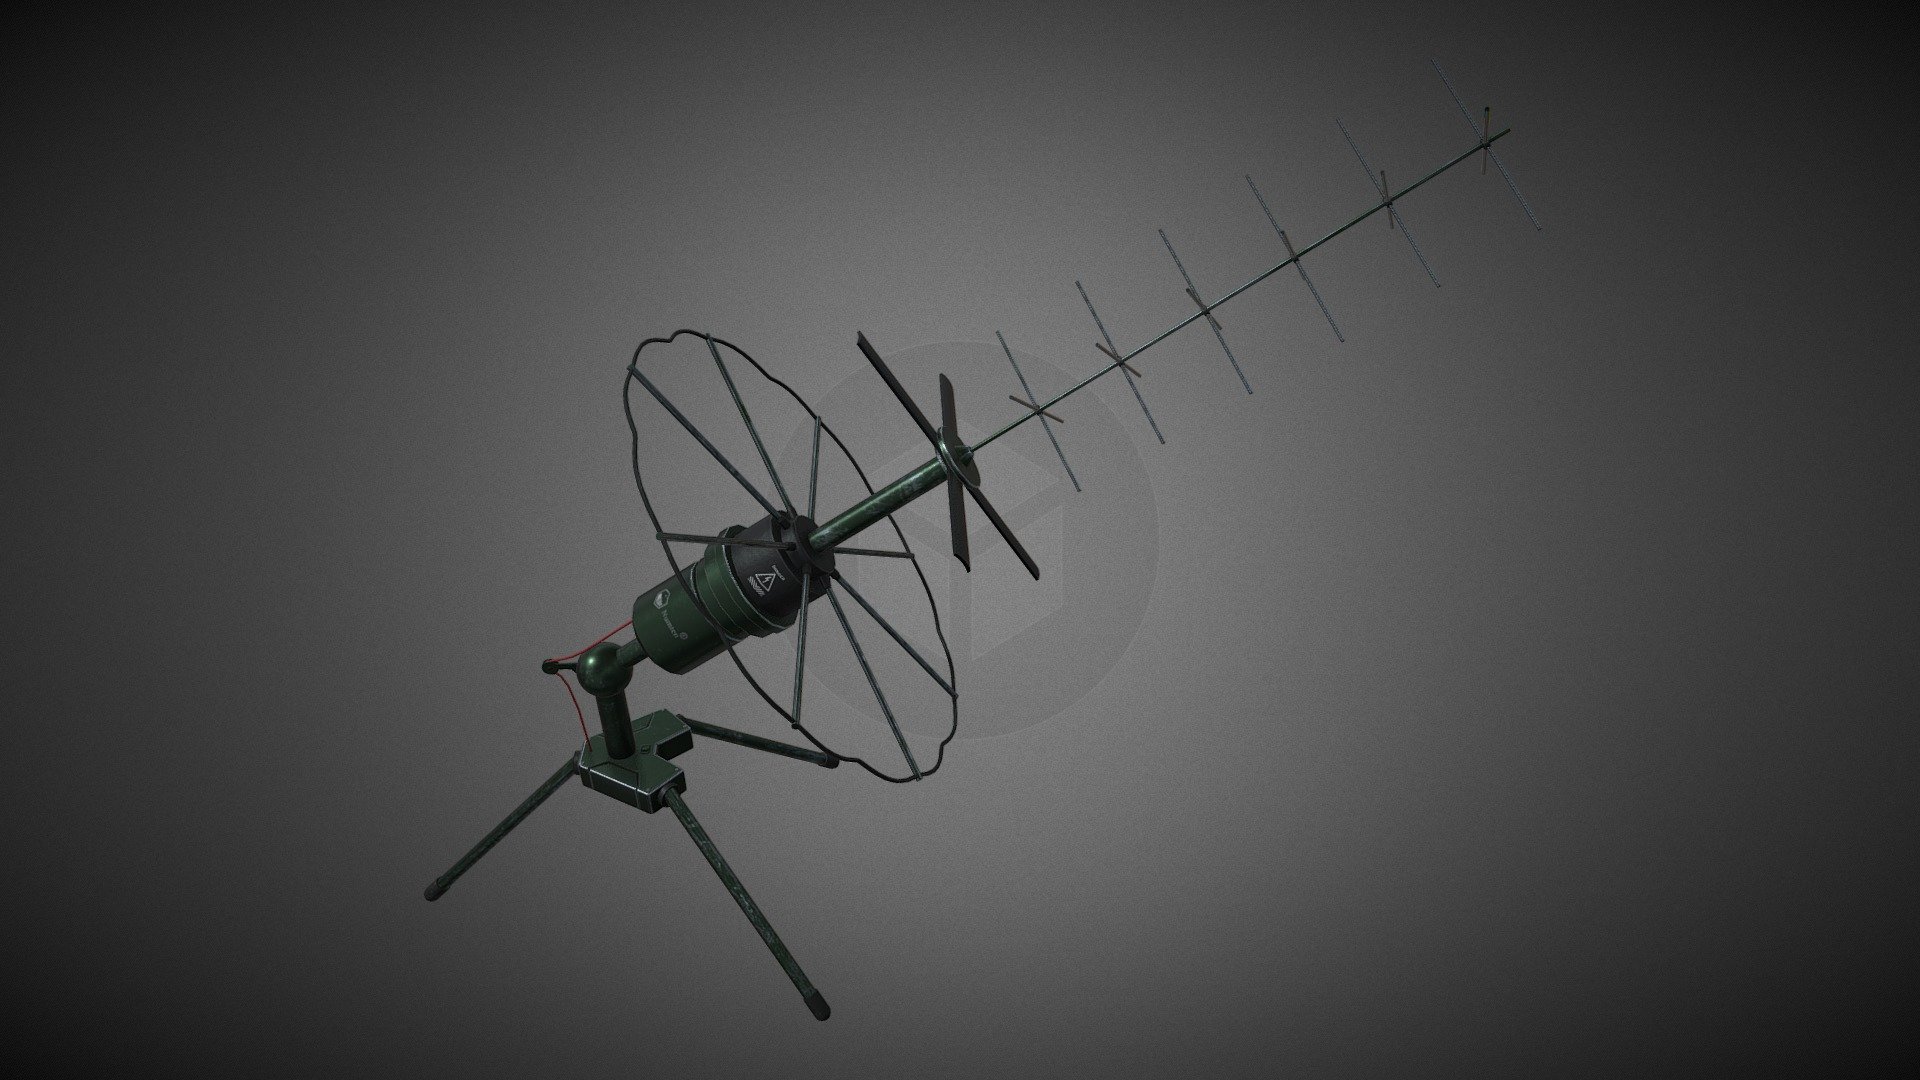 Military communication antenna made in blender, unwrapped and with PBR 4K materials Polygon count: Vertices: 4746 Triangles: 9102 Number of materials: 1 Types of materials and texture maps and number of textures: PBR (BaseColor, Curve, AO, Height, Metallic, Roughness and Normal) - 1 Texture Texture dimensions: 4096x4096 UV mapping: Yes Rigging: No Animated: No - Communication antenna - 3D model by zombitt 3d model